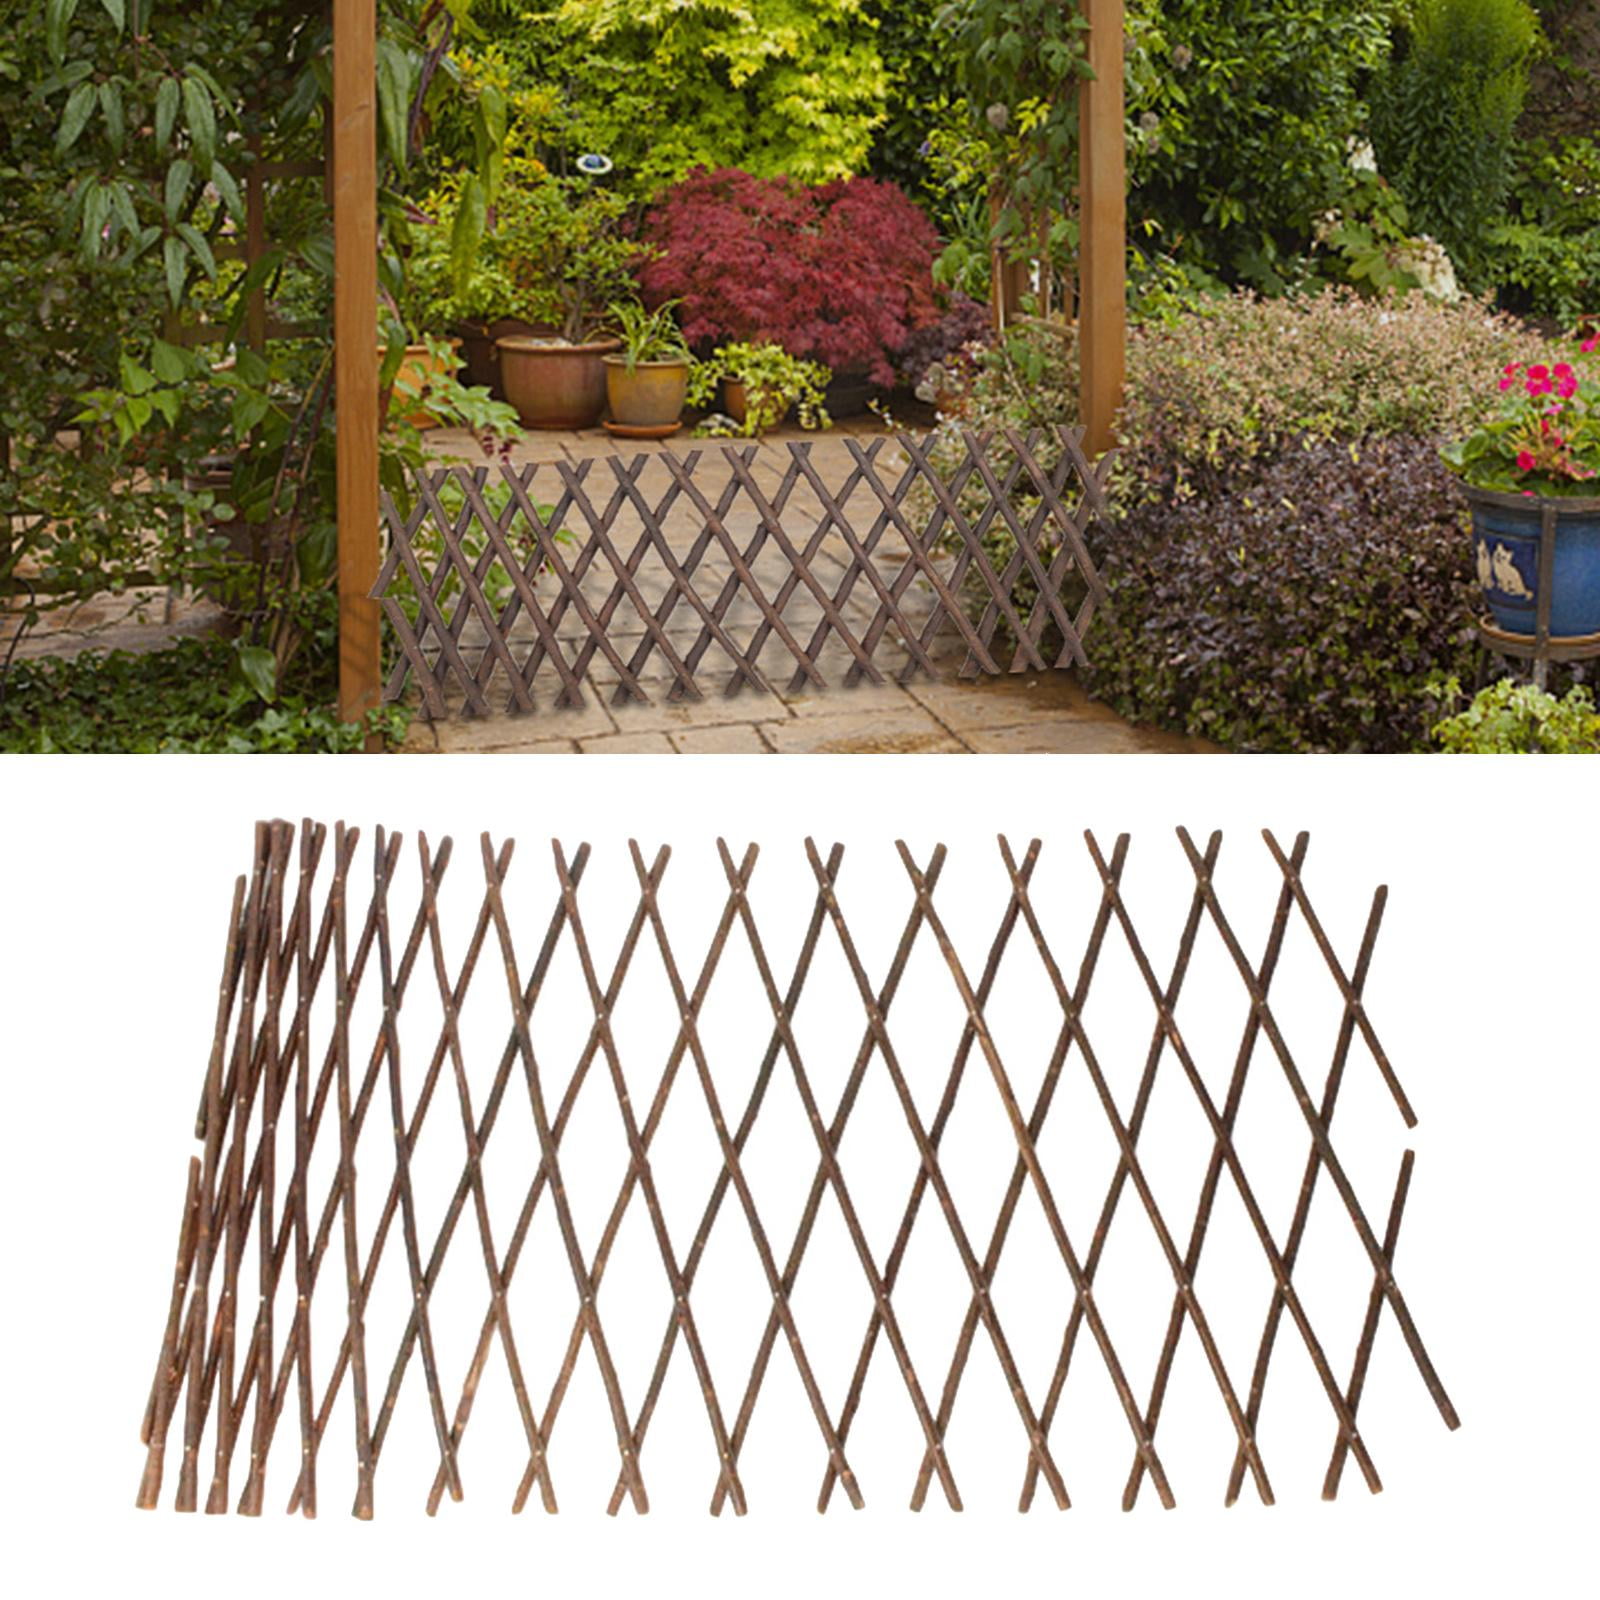 uyoyous Garden Fence Wood Expanding Fence Gate Panel for Home Yard Garden Plant Climb Trellis partition Decorative 2 Pack 